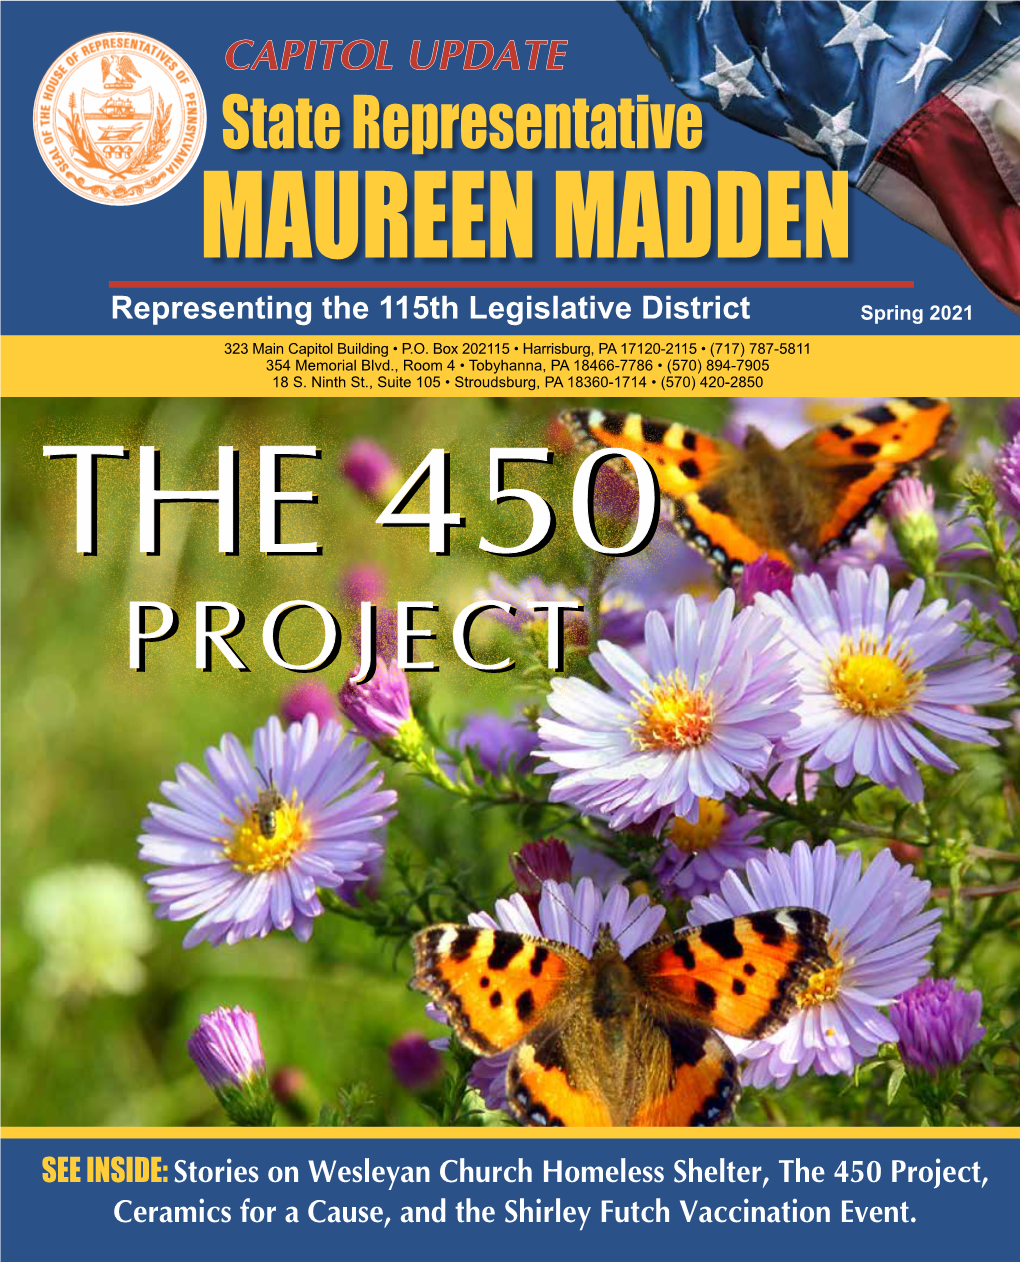 Maureen Madden Recognized That Local Businesses Were Struggling